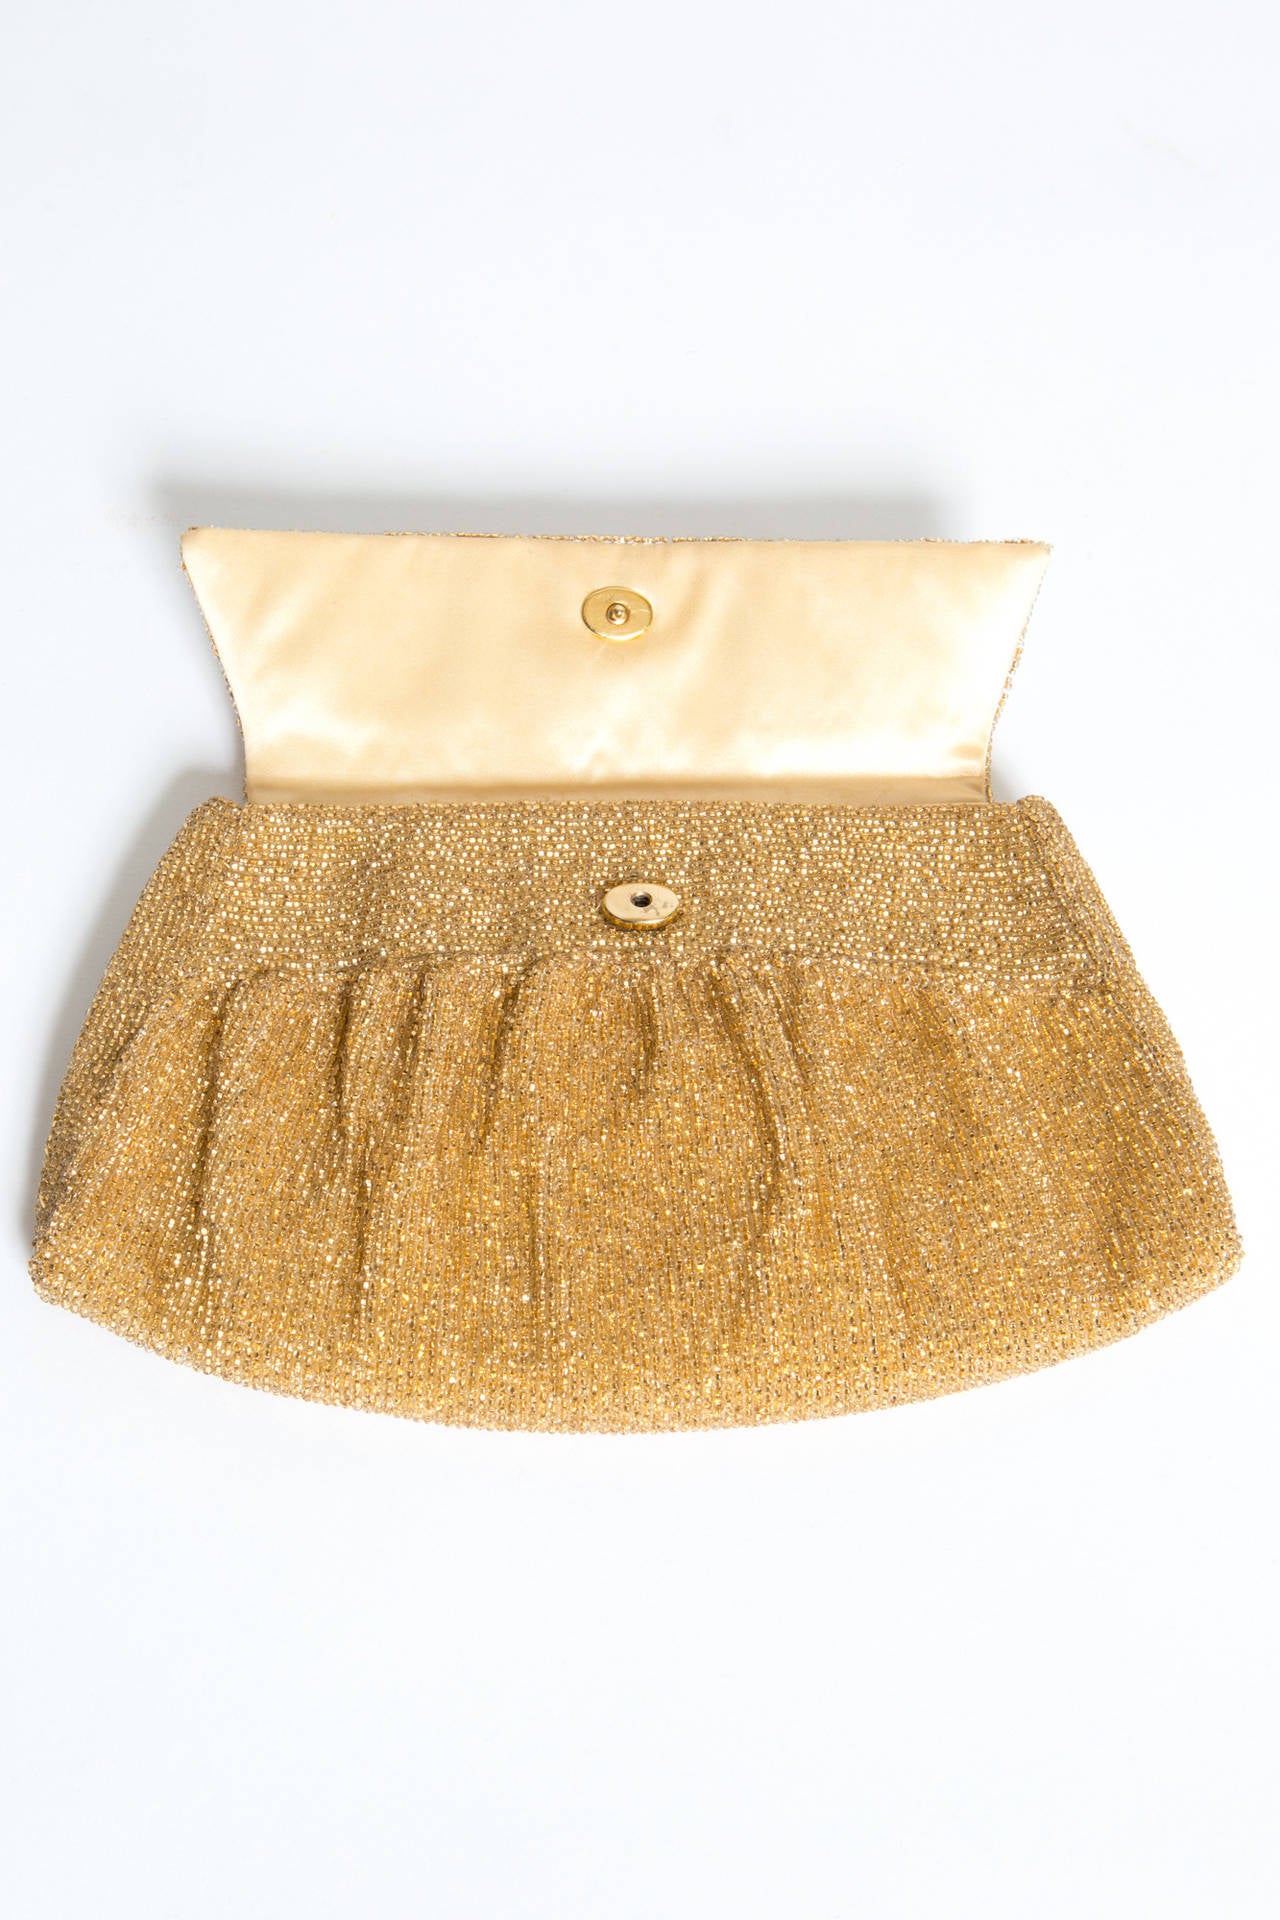 Brown 1970s Gucci Evening Gold Tone Beads Clutch